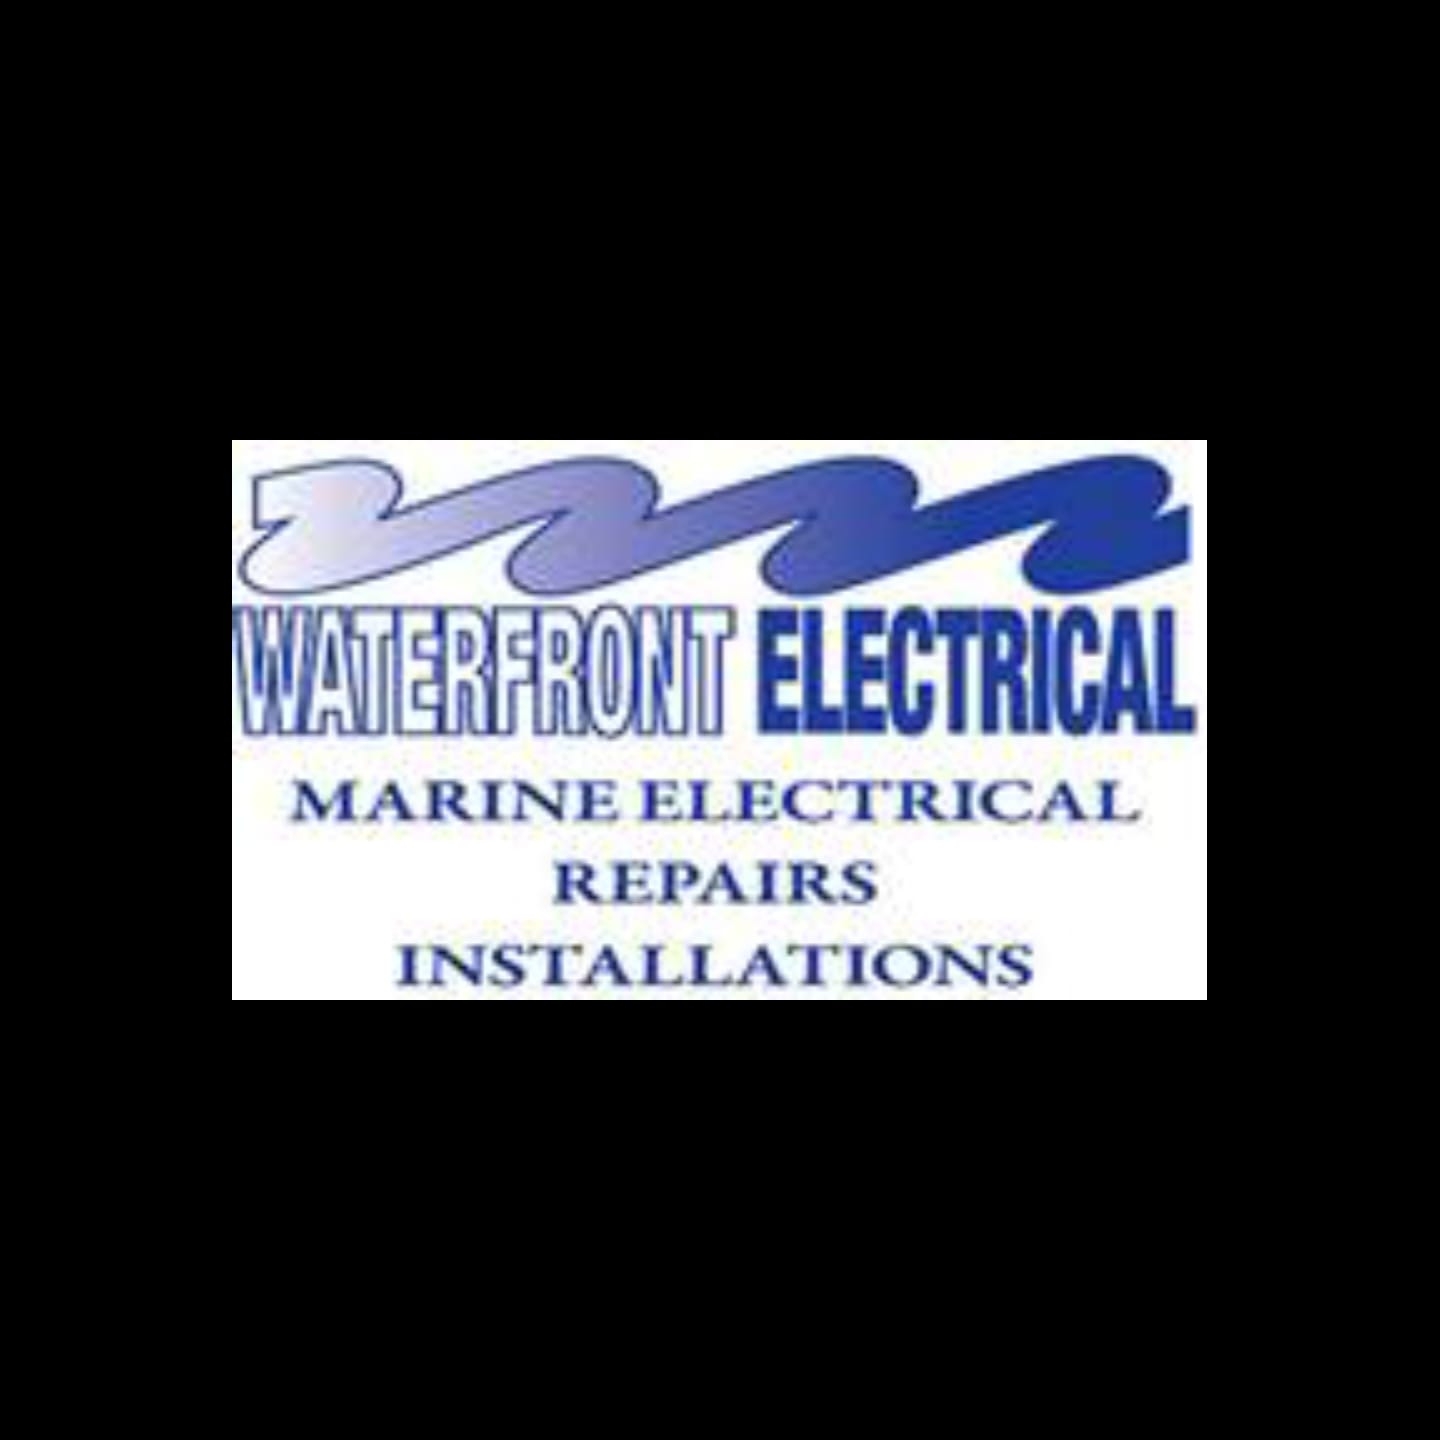 Waterfront Electrical